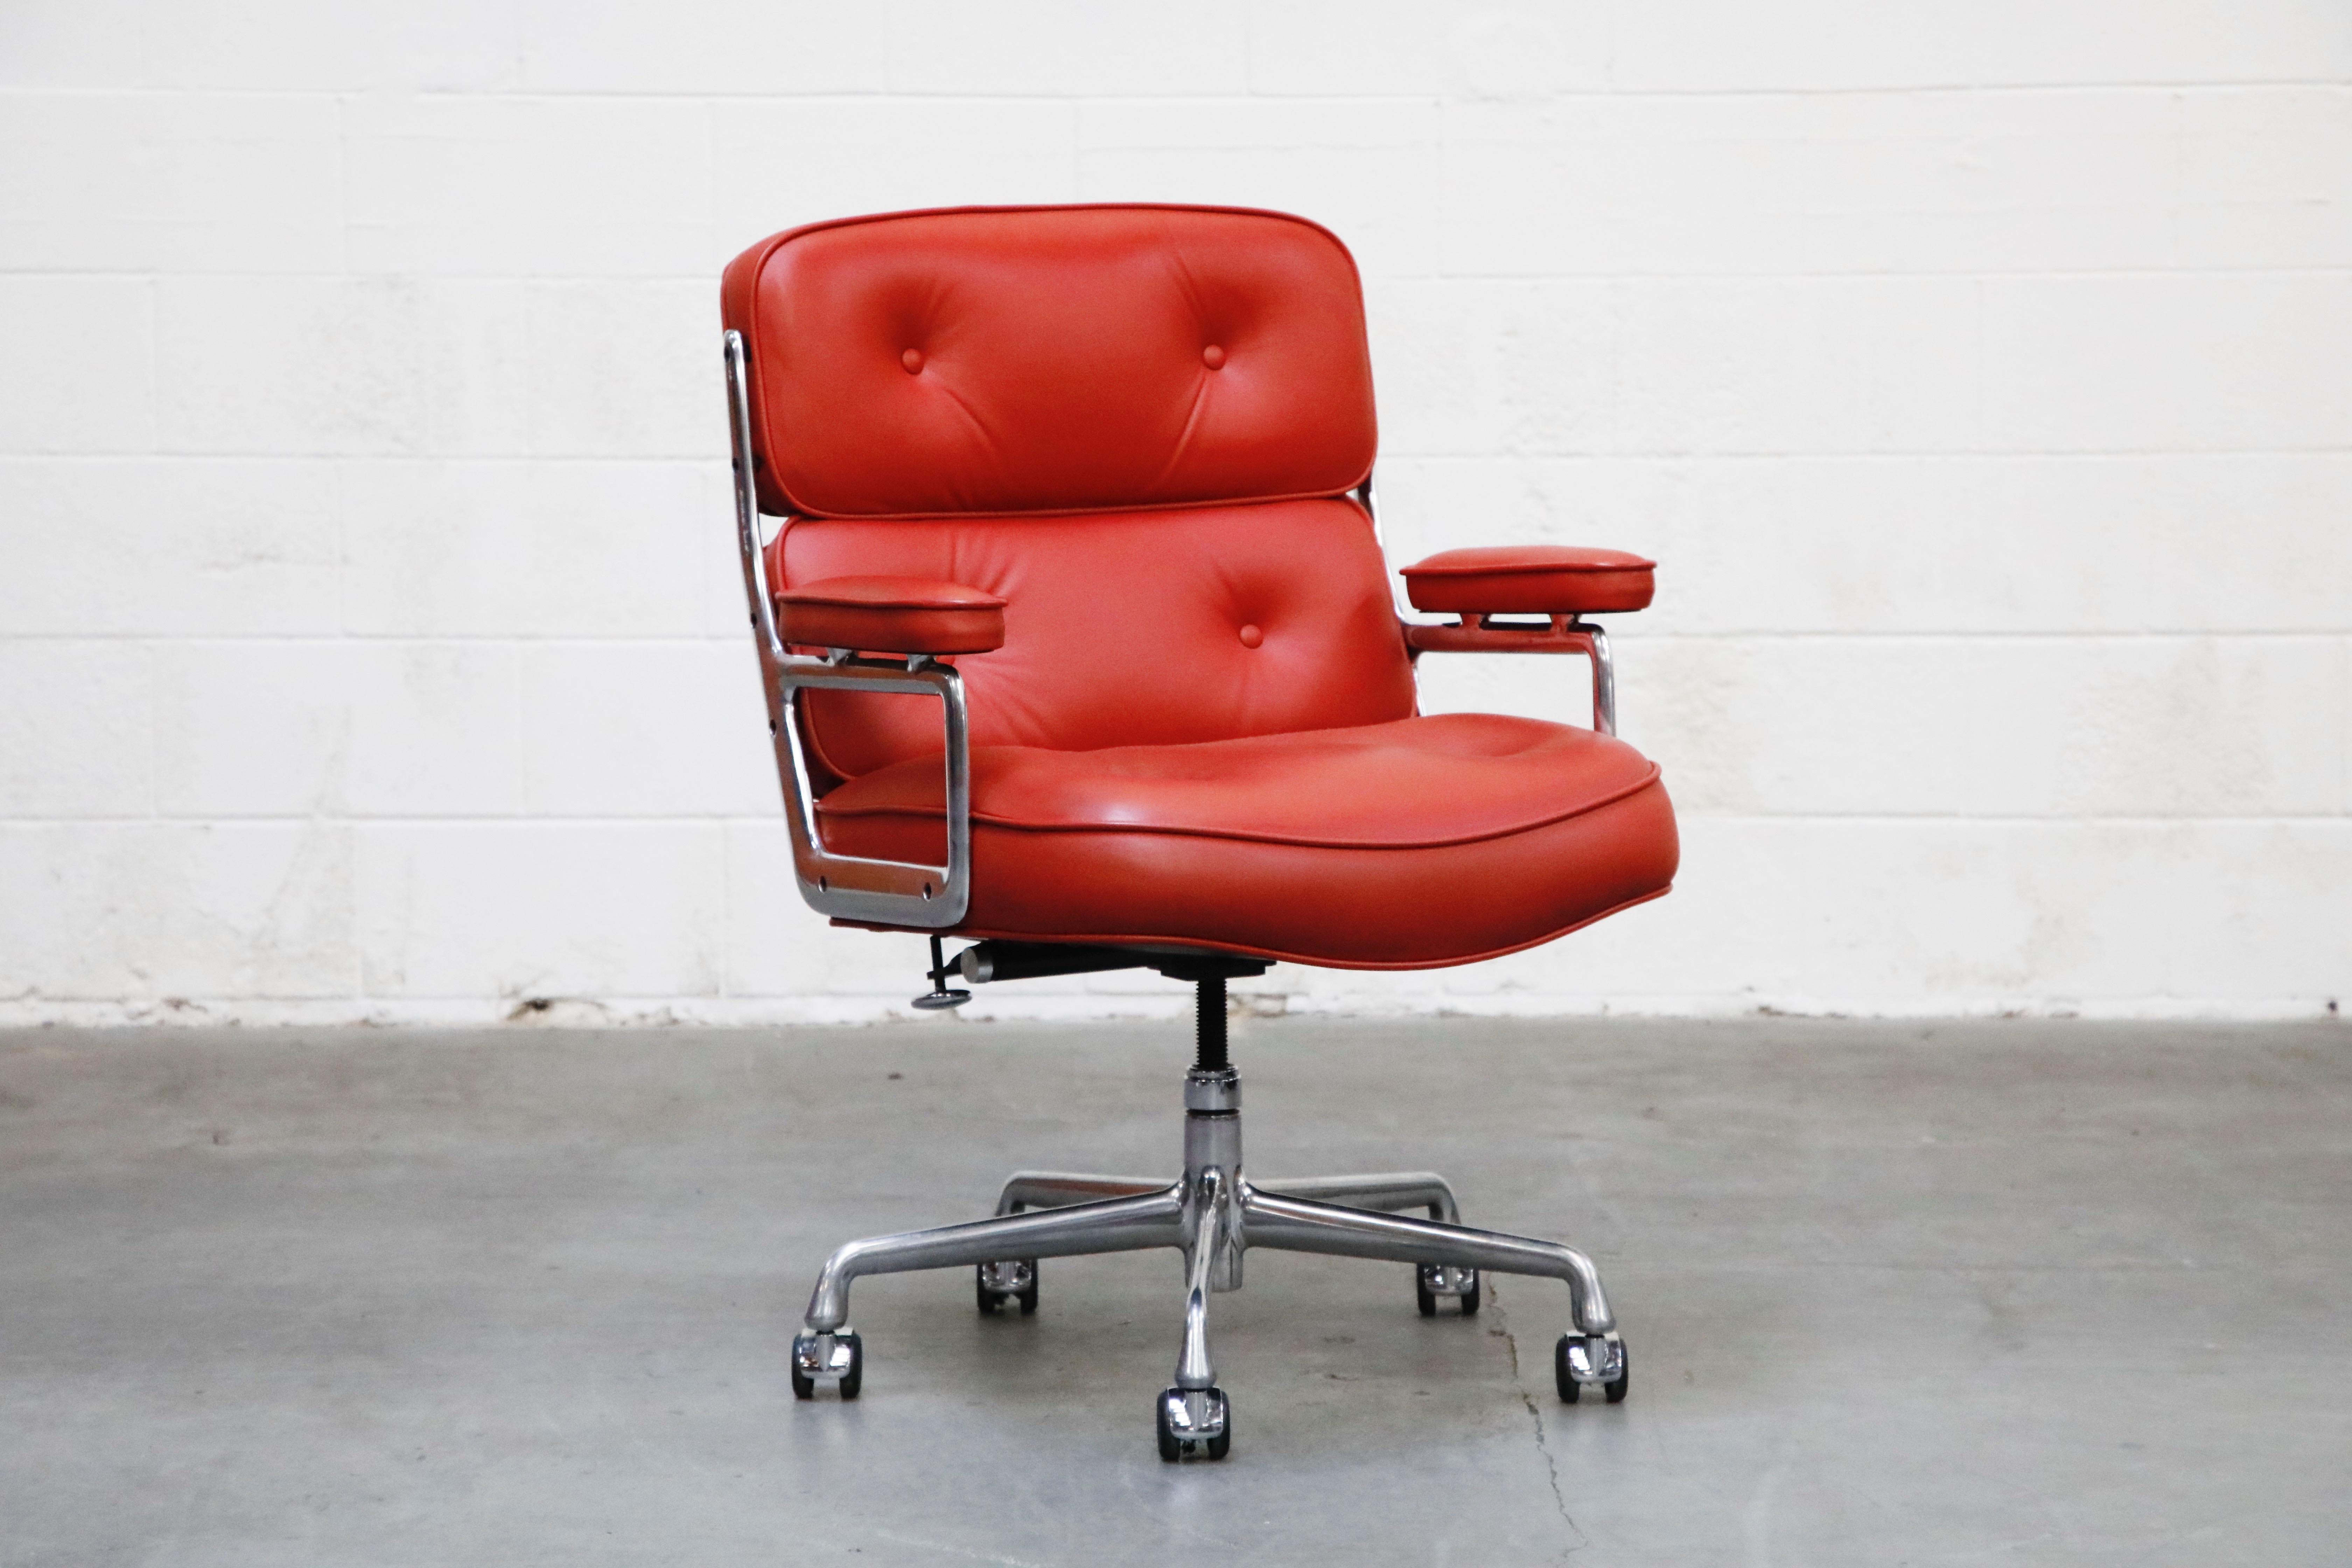 This incredible red leather 'Time Life' executive desk chair was designed by Charles and Ray Eames in 1959 and manufactured by Herman Miller. This comfortable and ergonomic executive chair features its original red leather over aluminum frame with